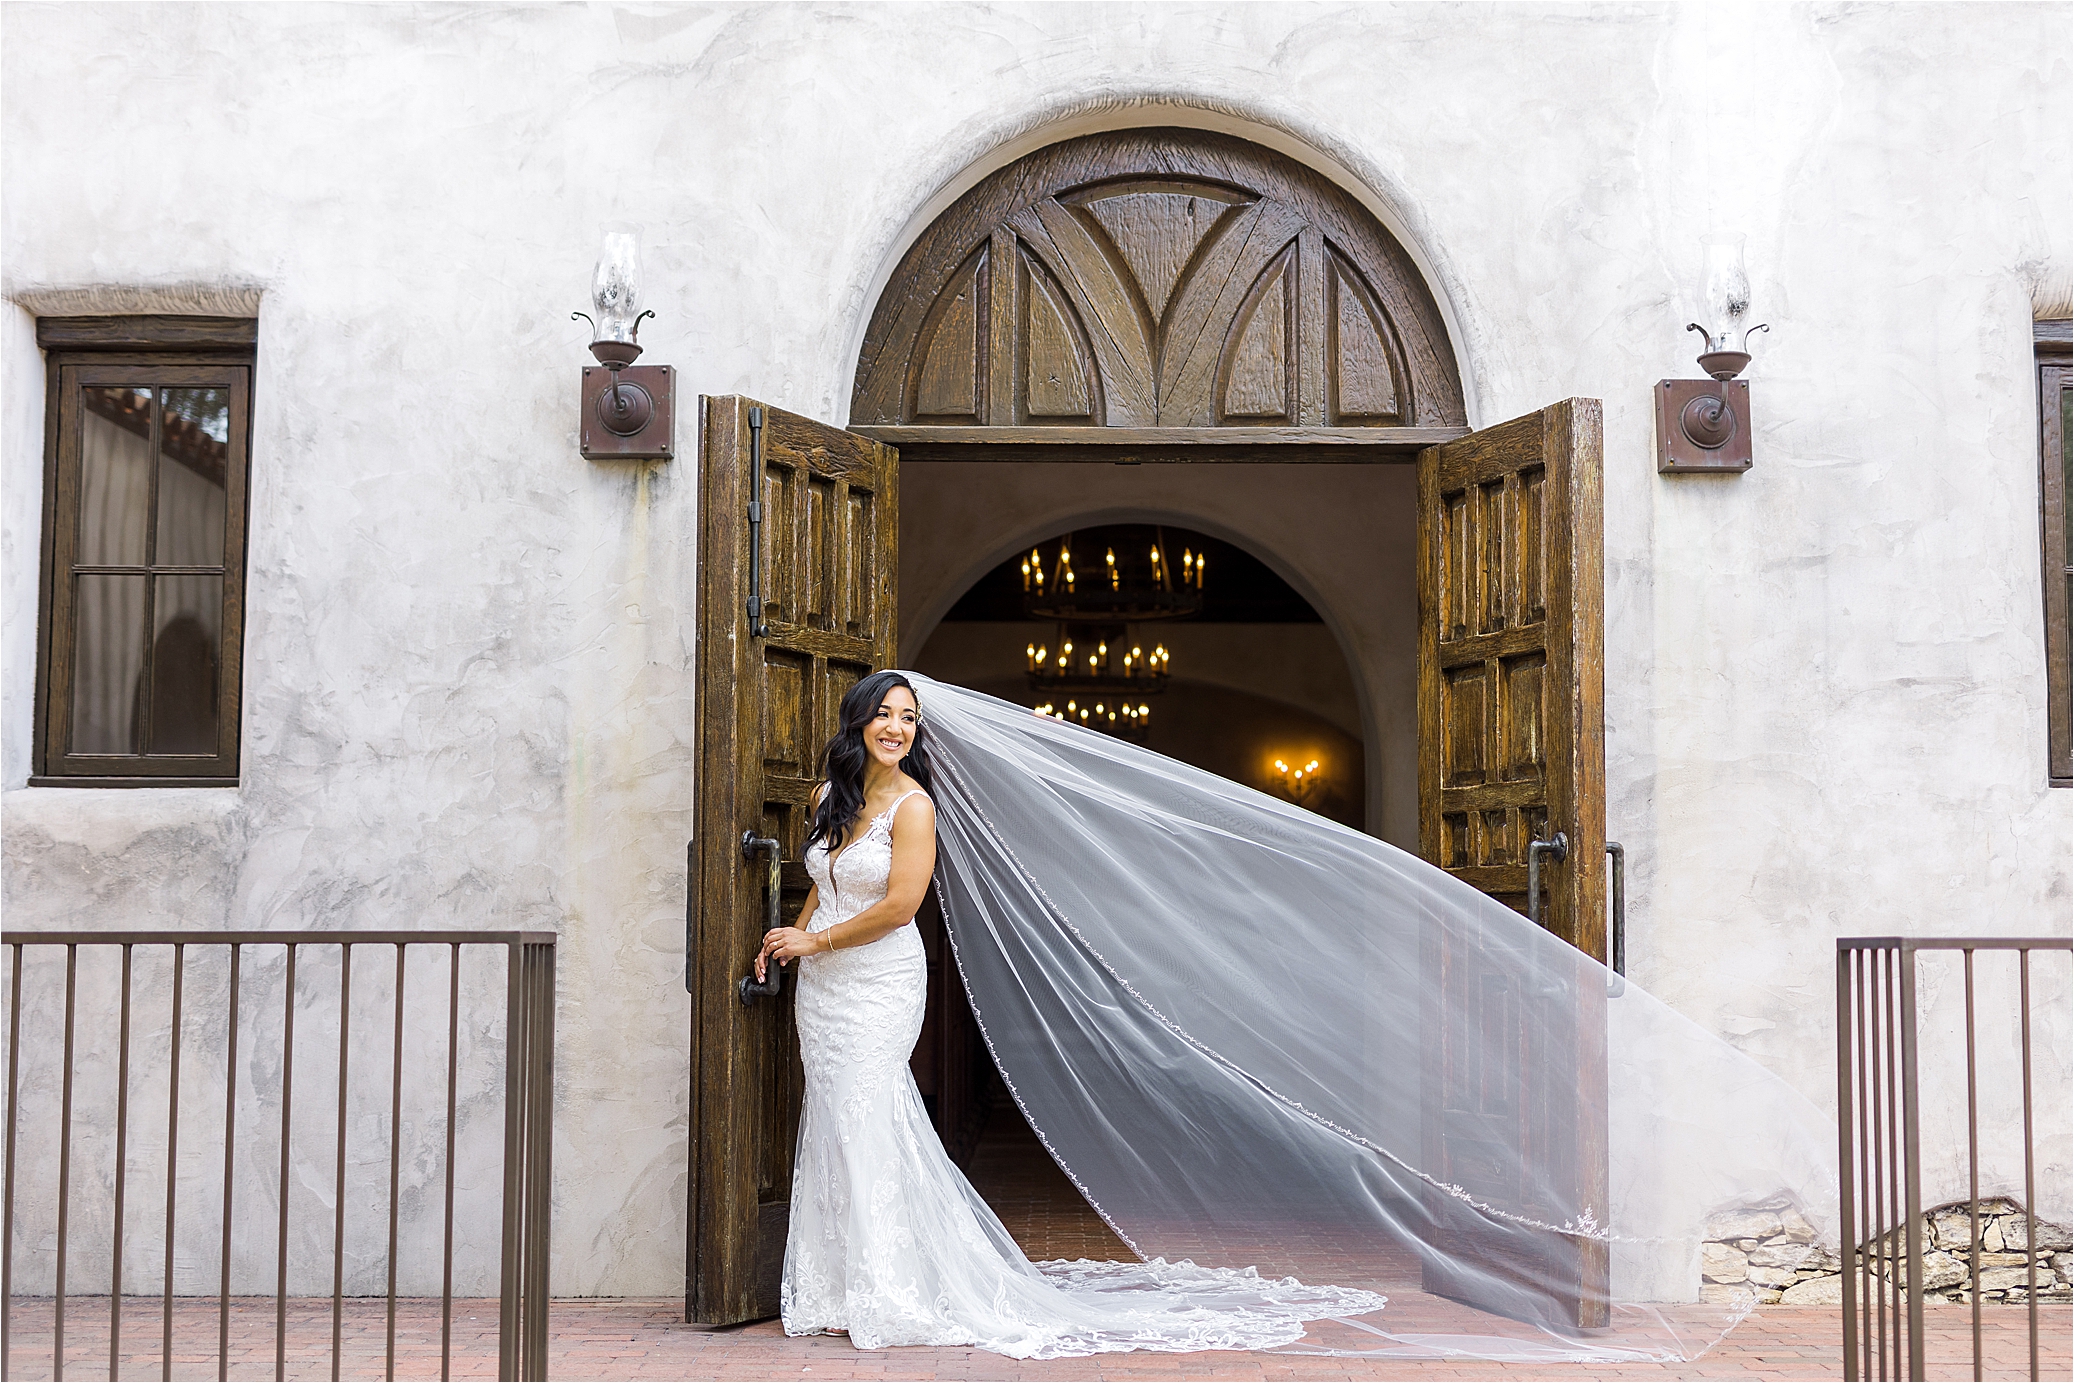 A bride smiles back over her shoulder as her veil blows in the wind in front of an old brown door at a Mission Venue in San Antonio Texas during her bridal session with Jillian Hogan